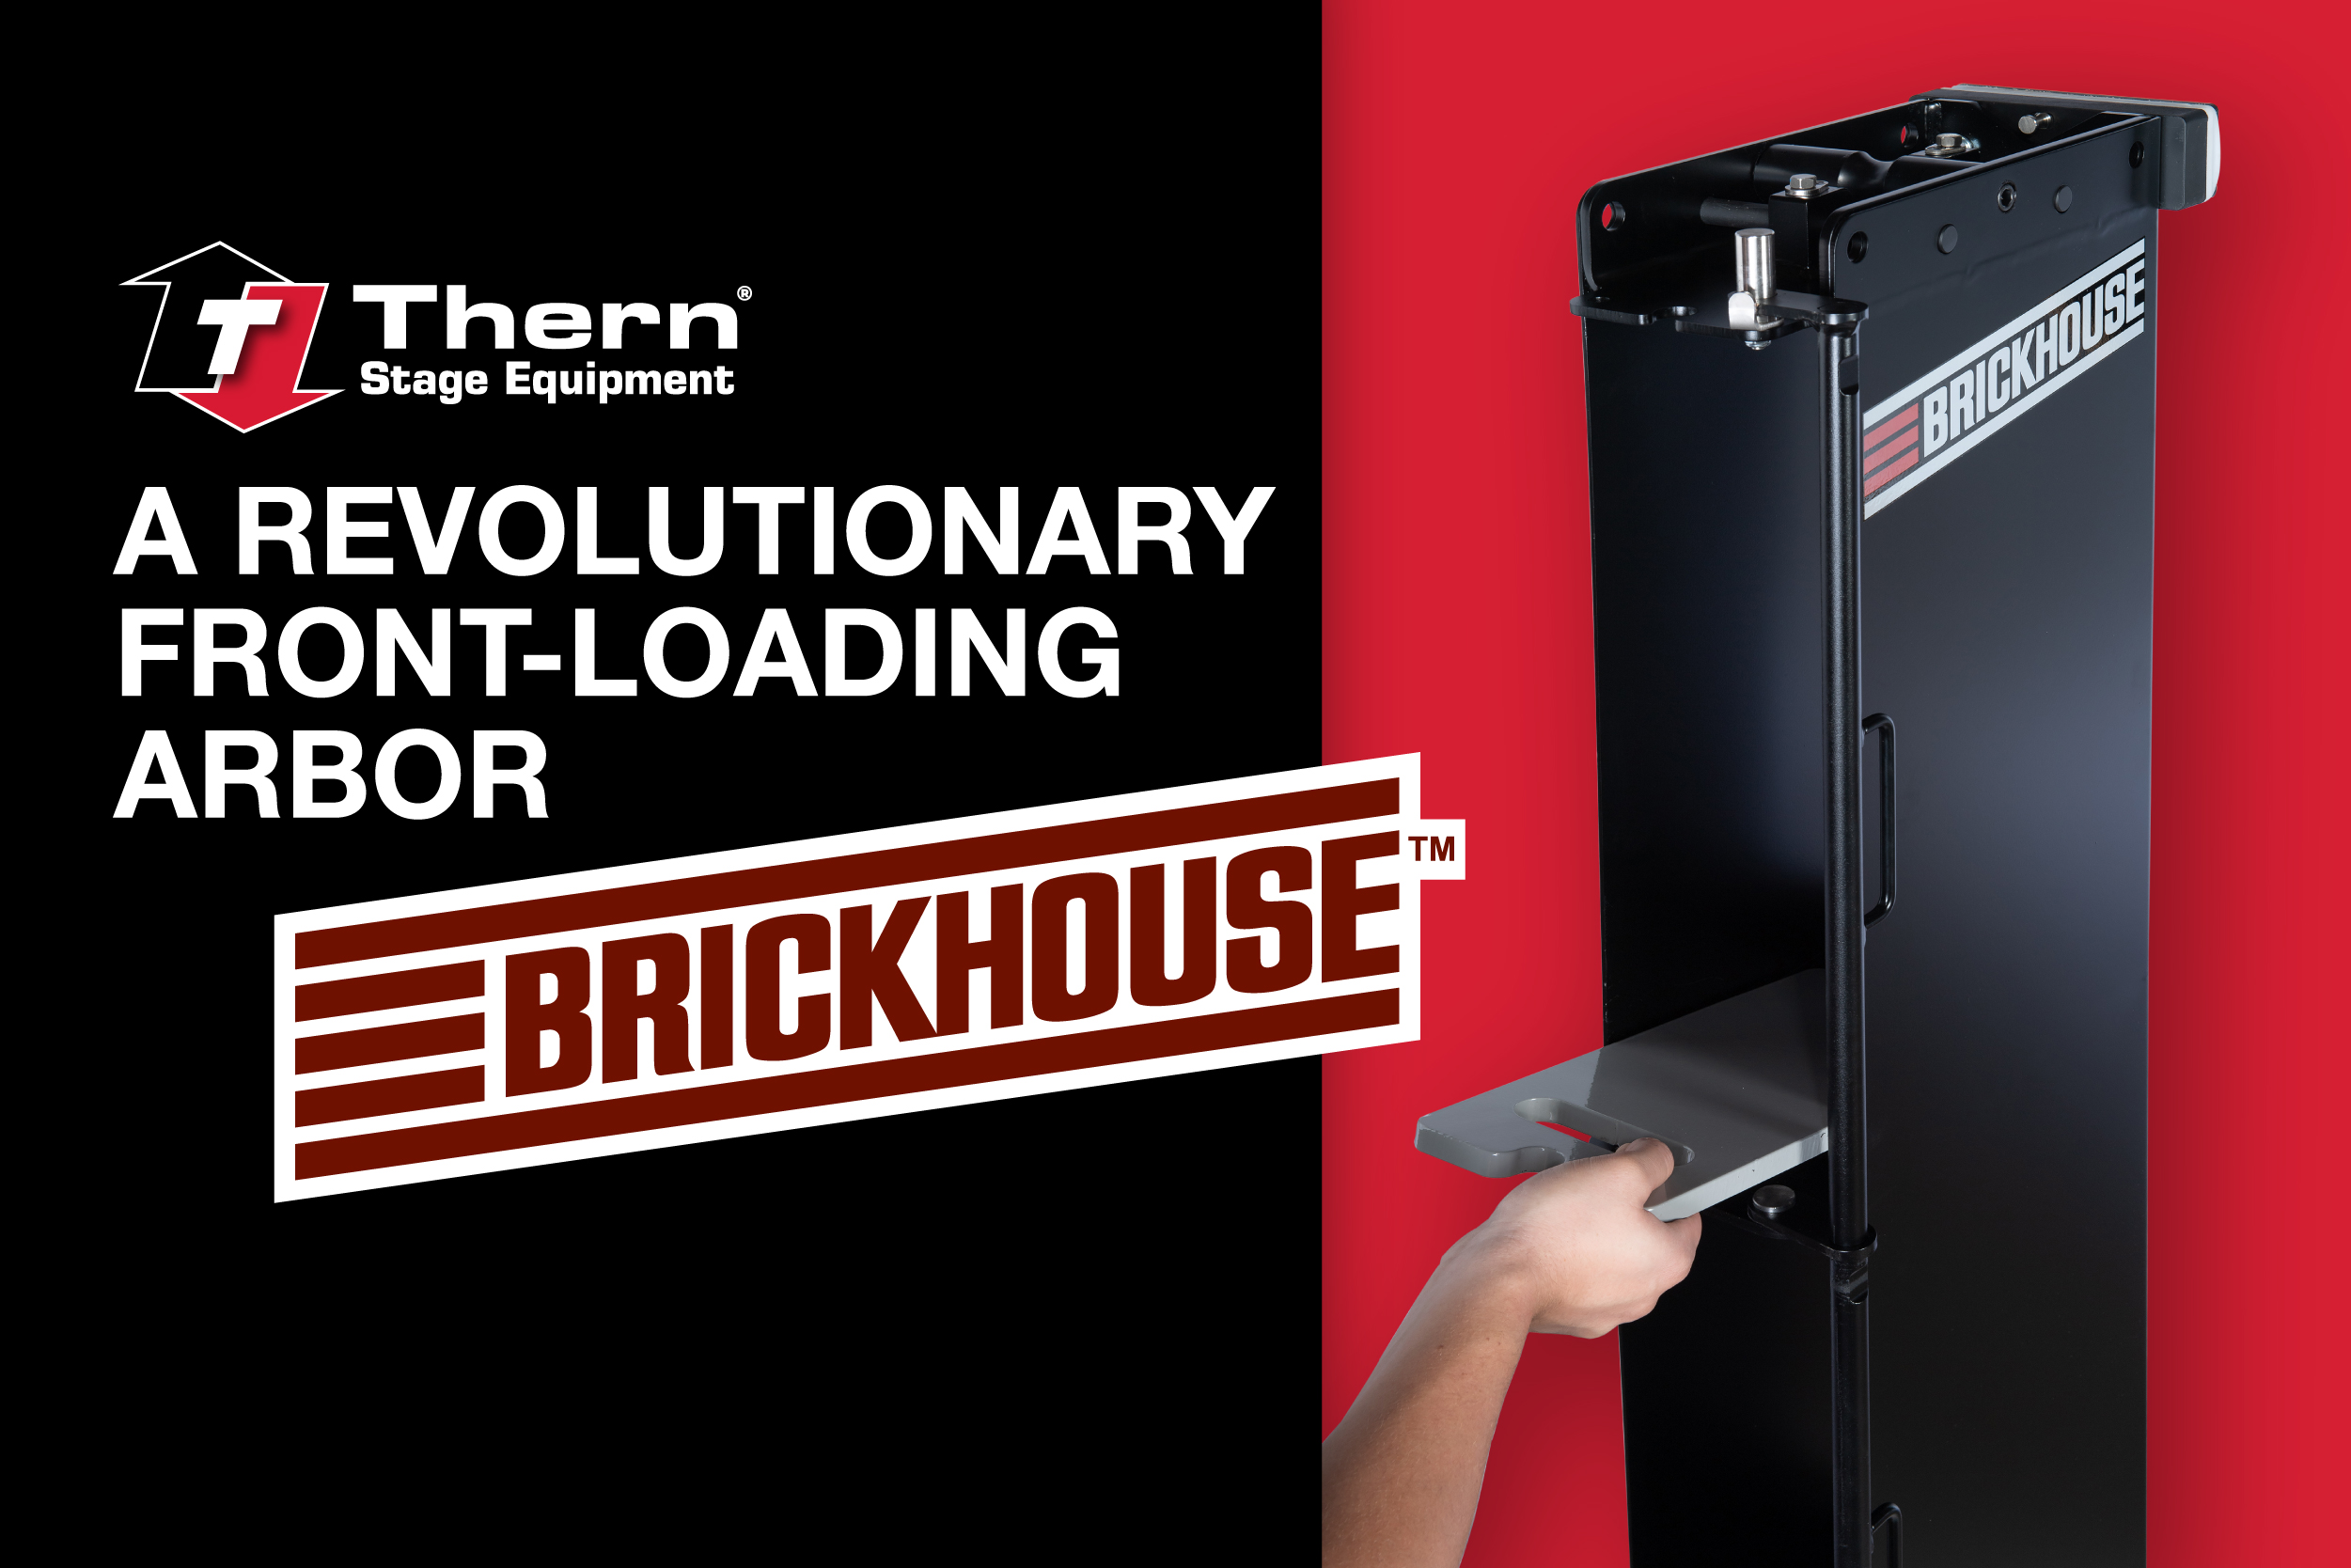 Thern Stage Equipment A Revolutionary Front-Loading Arbor